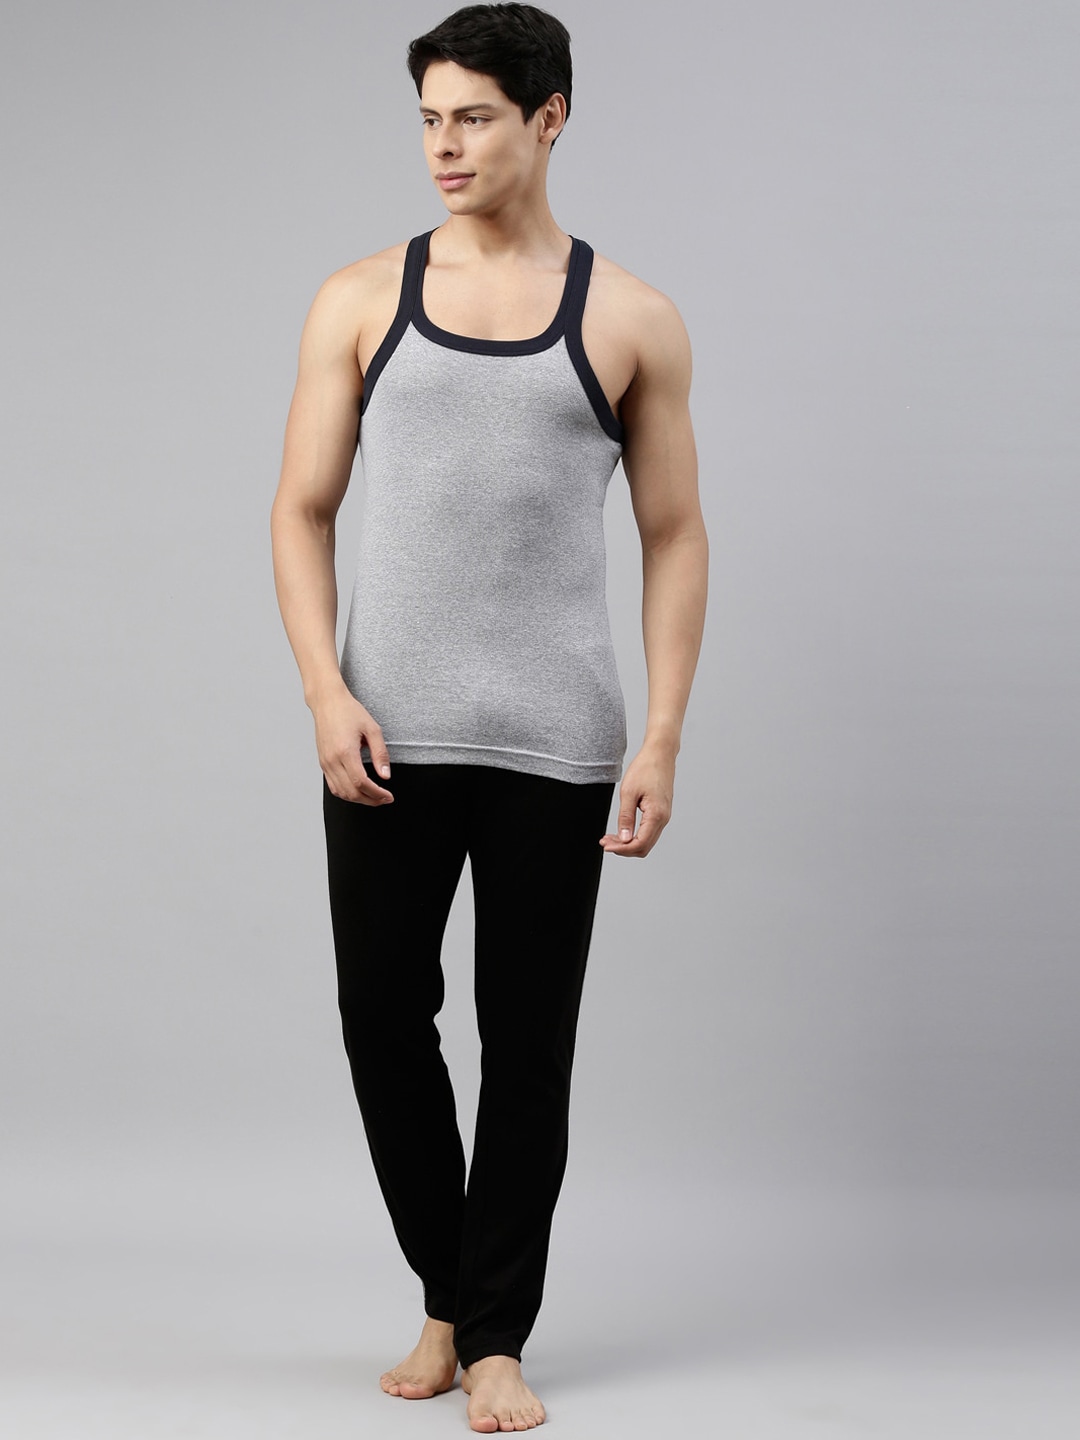 Clothing Innerwear Vests | DIXCY SCOTT Men Grey & Black Solid Combed Cotton Gym Vests Pack Of 2 - SM63256